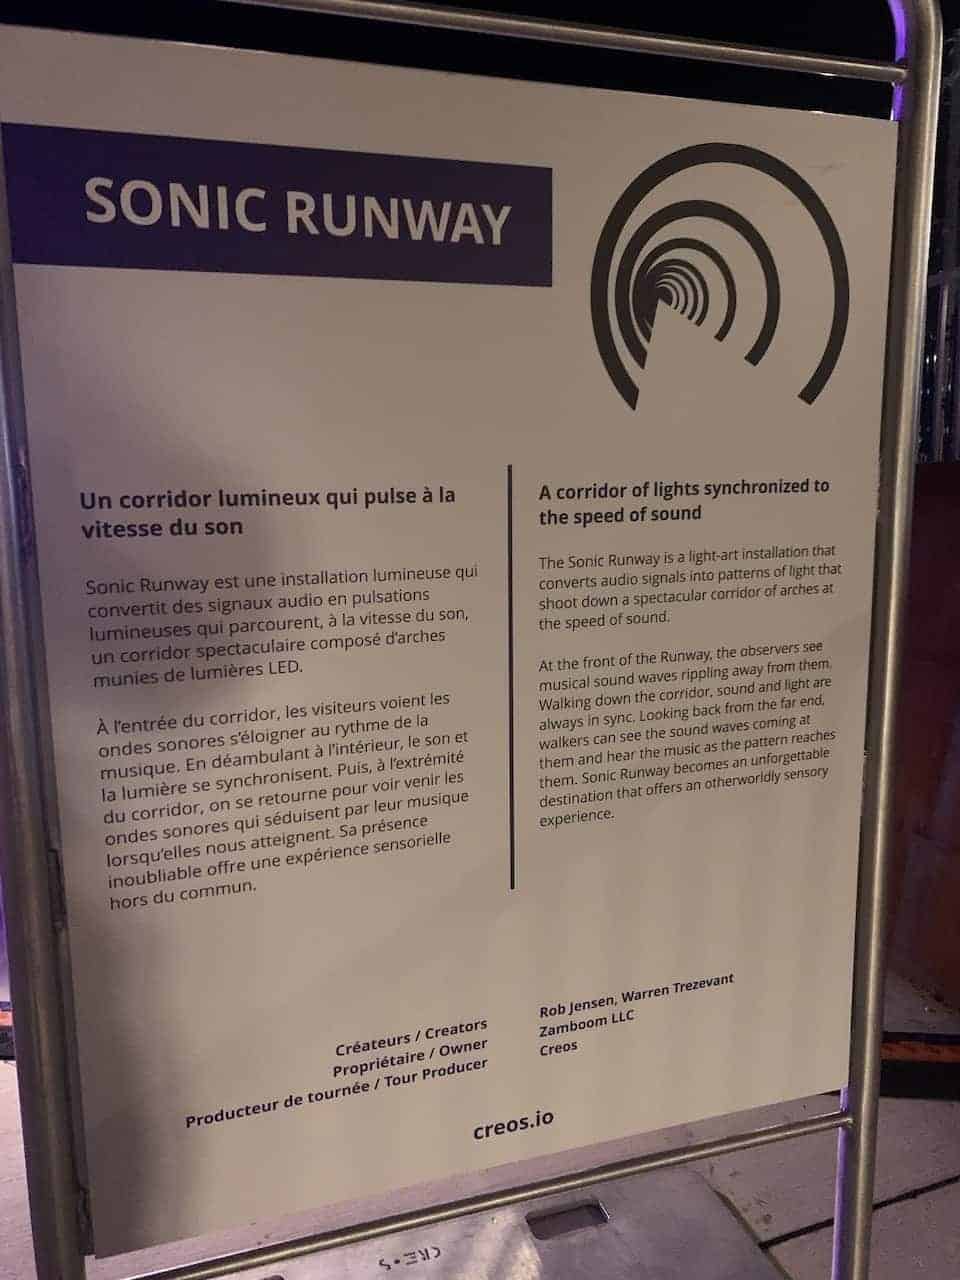 Sonic Runway Pier 8 Hamilton Ontario Information Sign - There was a sign at the start for visitors to learn how the Sonic Runway in Hamilton, Ontario works.